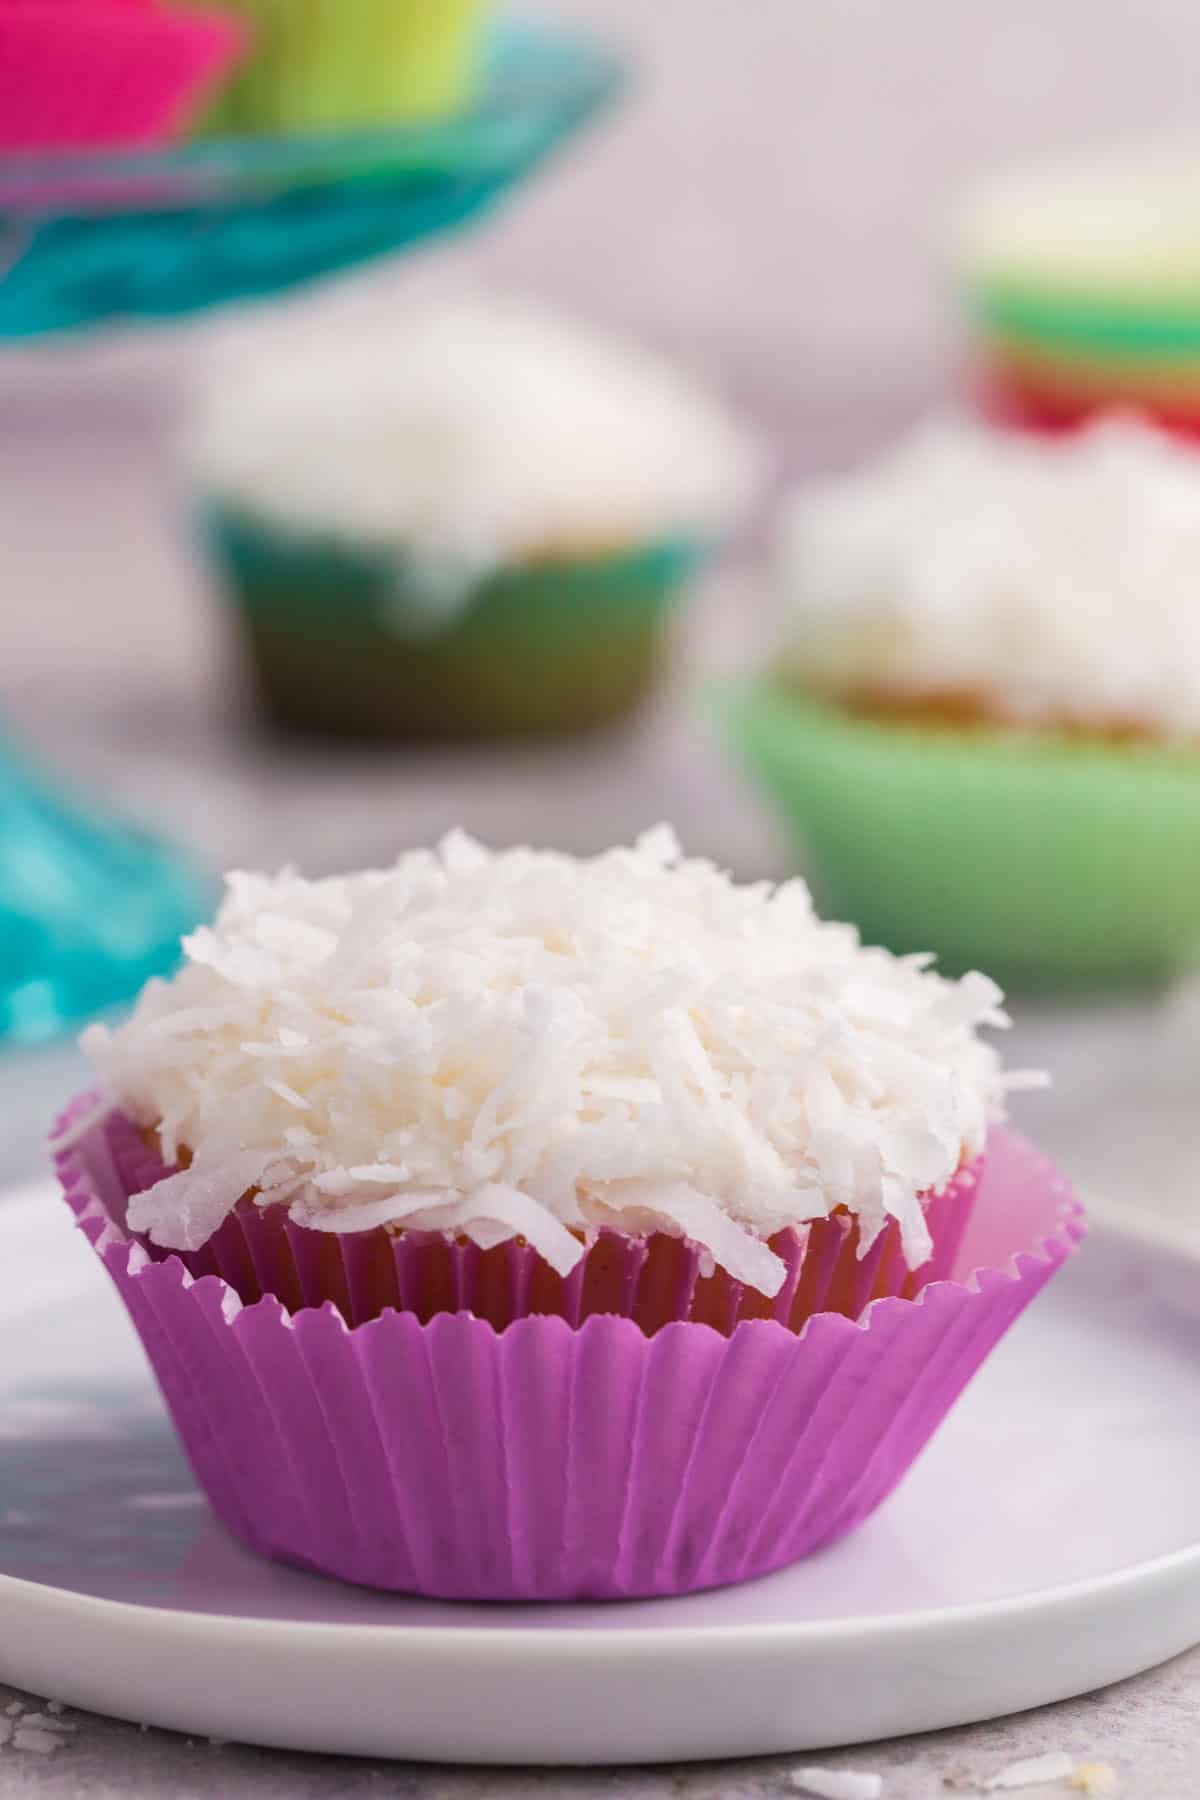 A coconut cupcake in a pink wrapper.